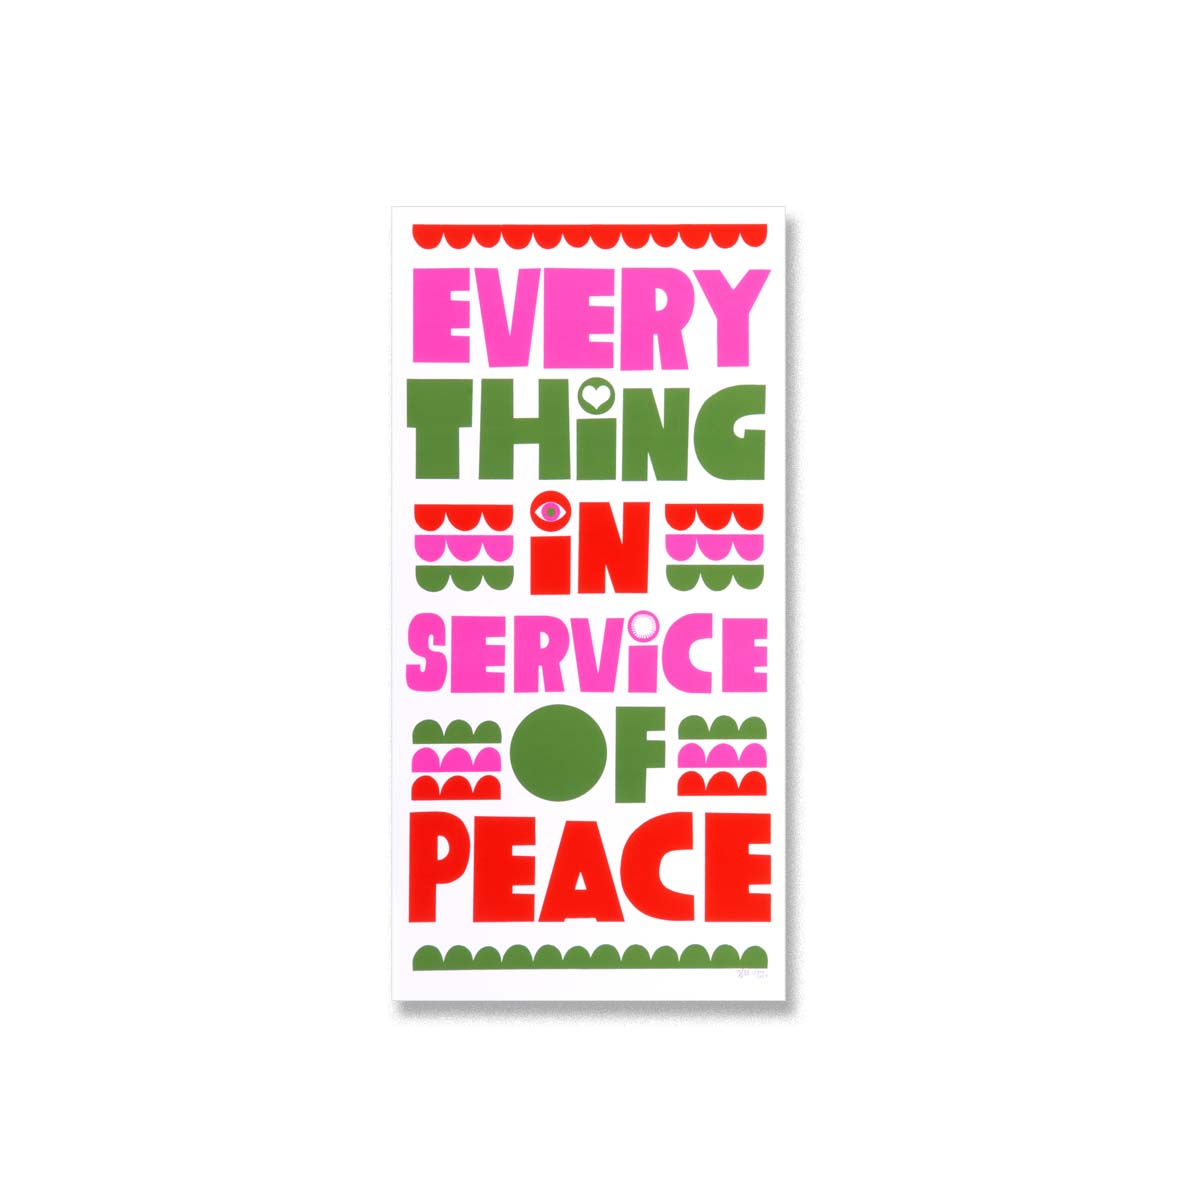 Everything In Service of Peace- Limited Edition Serigraph